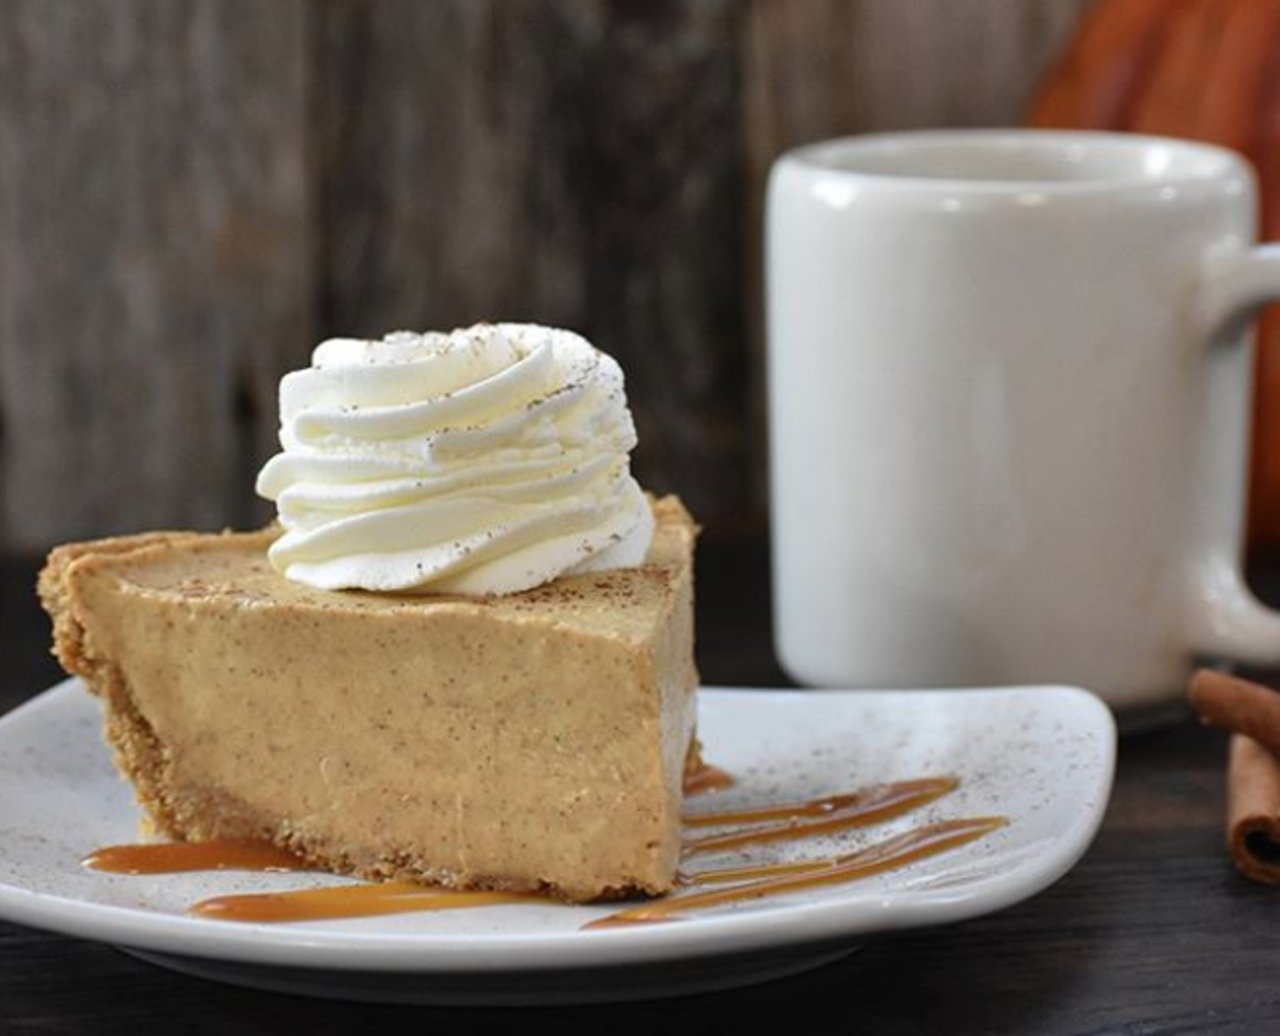 Luby’s
Multiple locations, lubys.com
Known for its Southern fare served cafeteria-style, Luby’s serves up a wide array of entrees and sides that feel just like home. Just as comforting are the desserts, among them the pumpkin pie. Be sure to grab a slice while it's still in season.
Photo via Instagram / lubys